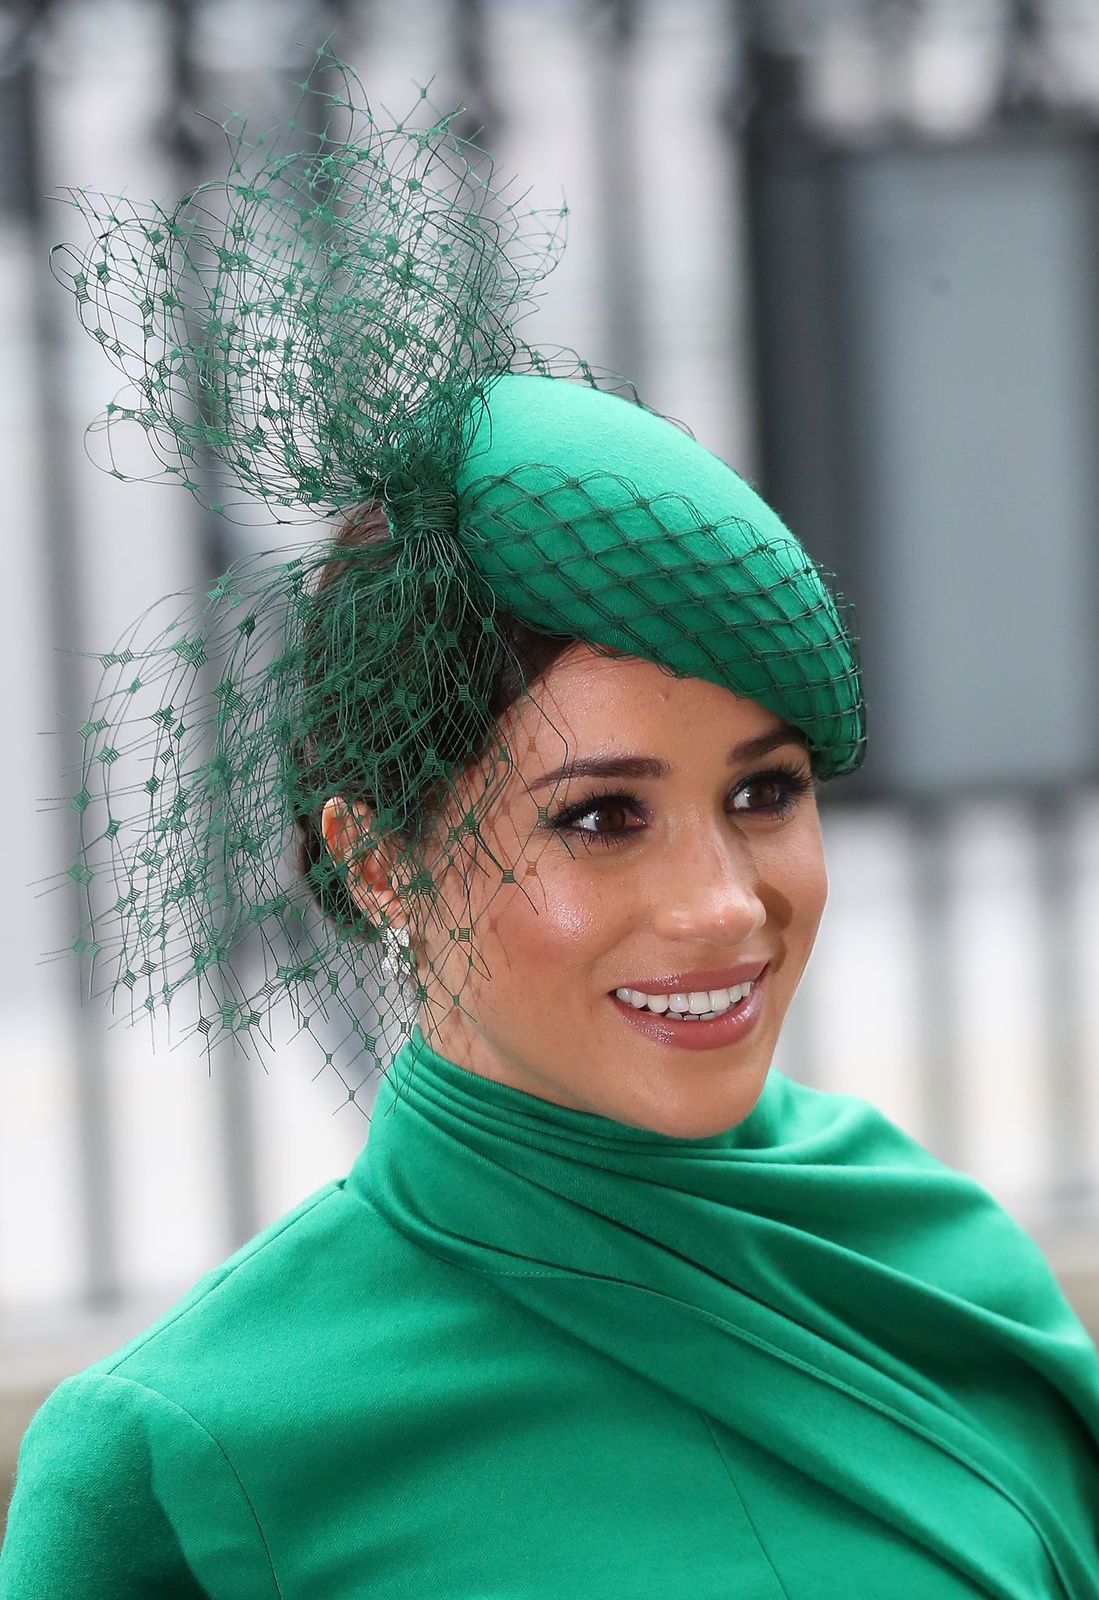 Duchess Meghan at the Commonwealth Day Service on March 09, 2020, in London, England | Photo: Chris Jackson/Getty Images